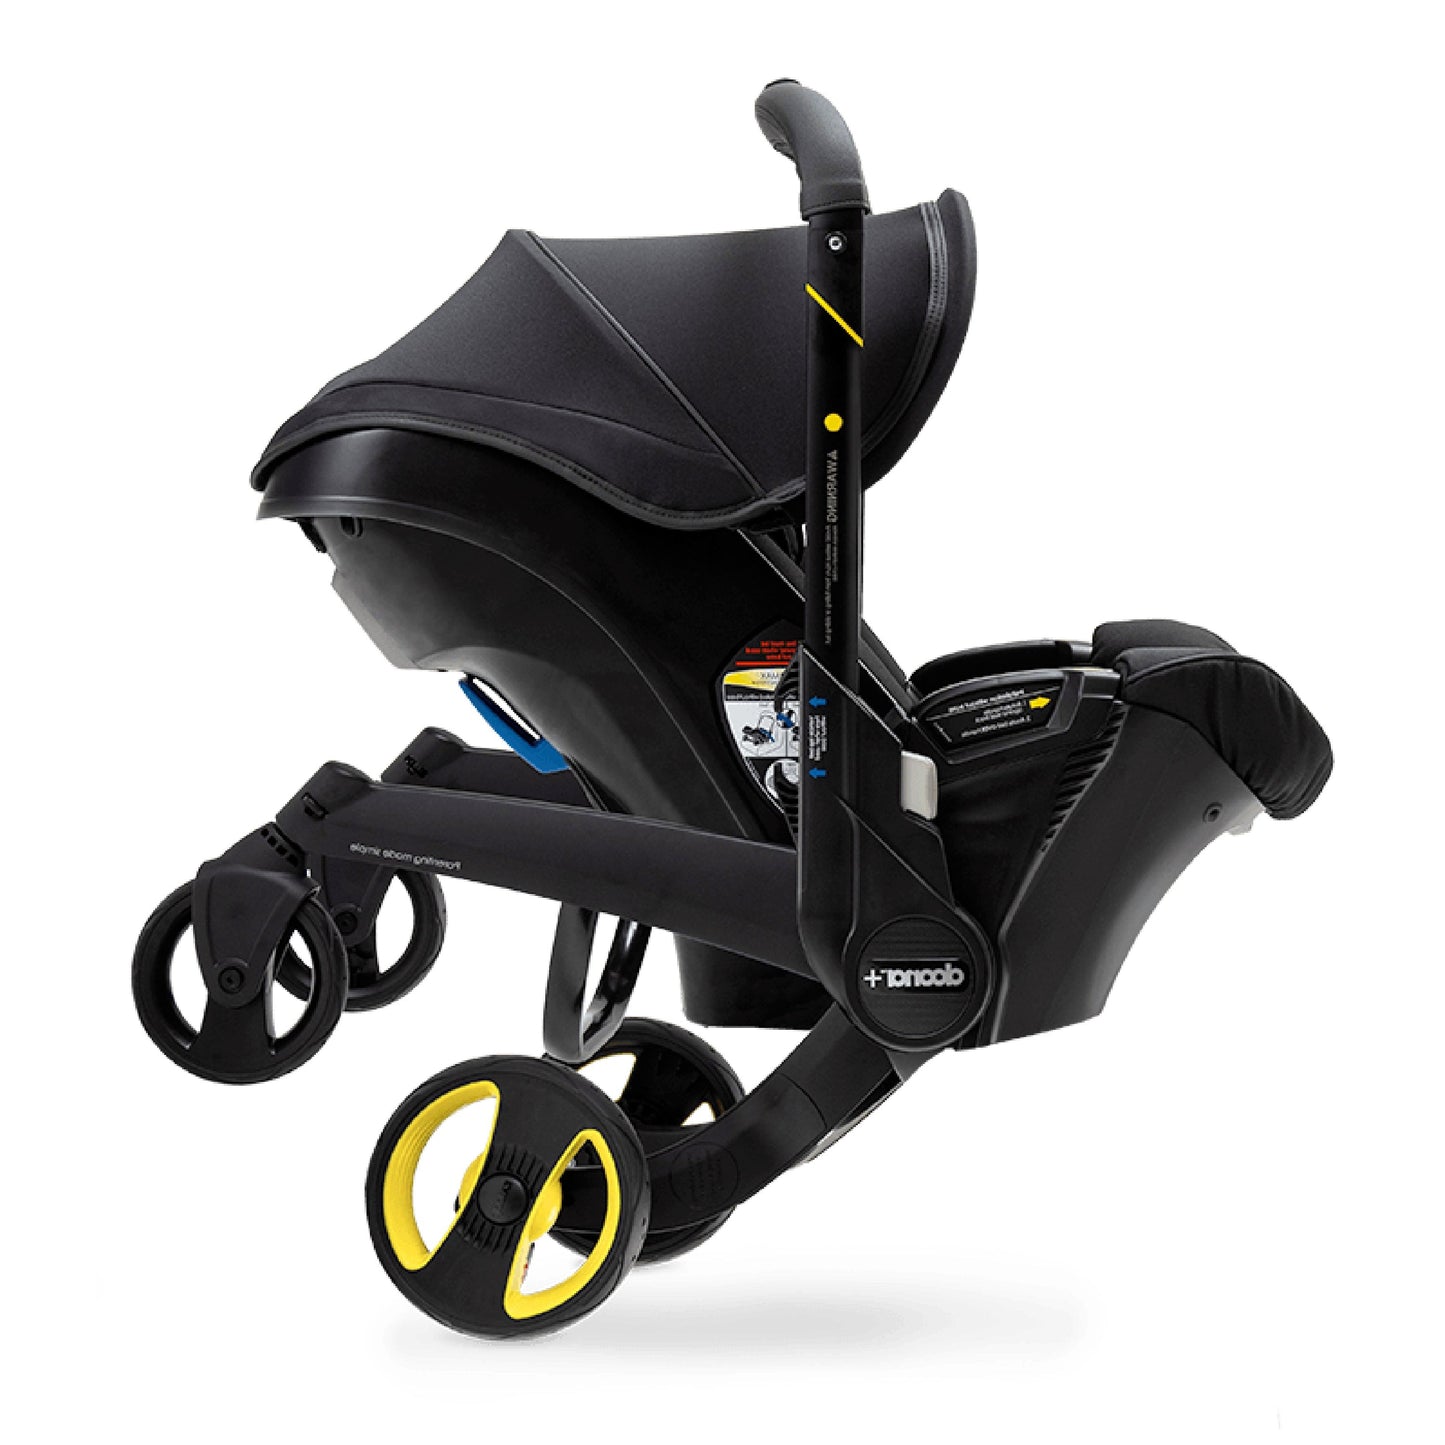 Doona Infant Car Seat and Stroller - Midnight Edition